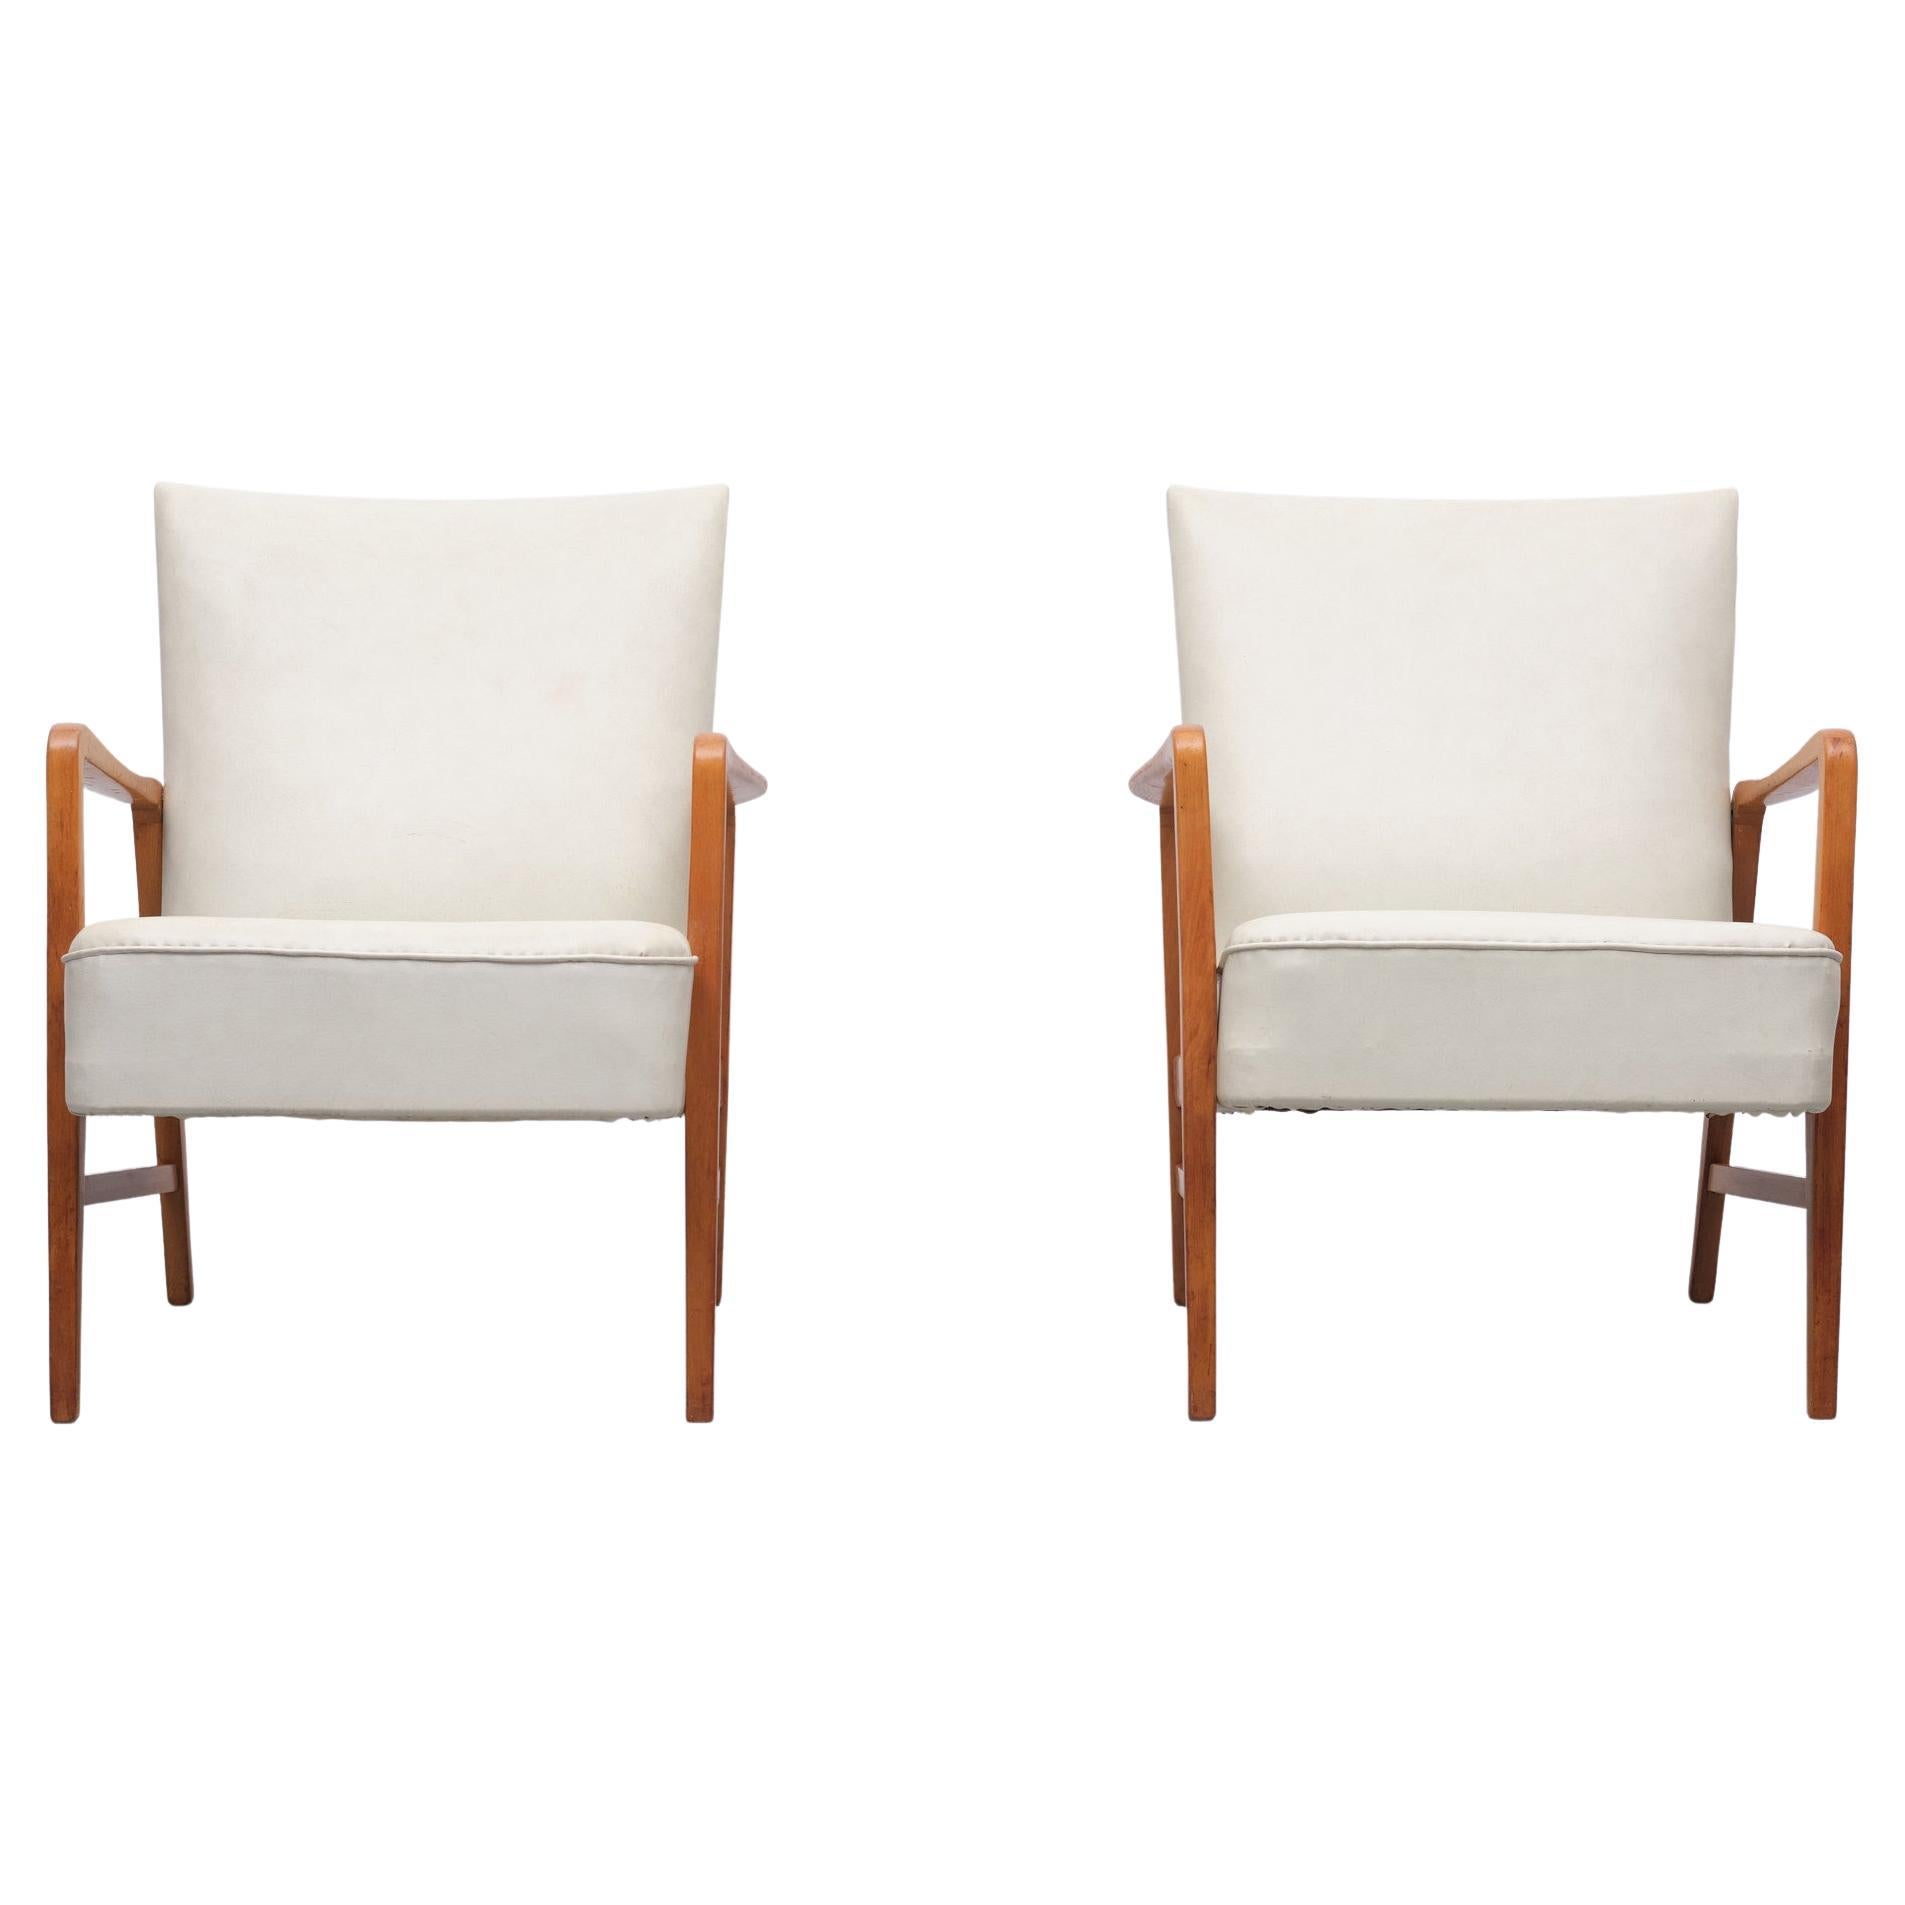 Dux of Sweden Lounge Chairs Sweden, 1950s 4